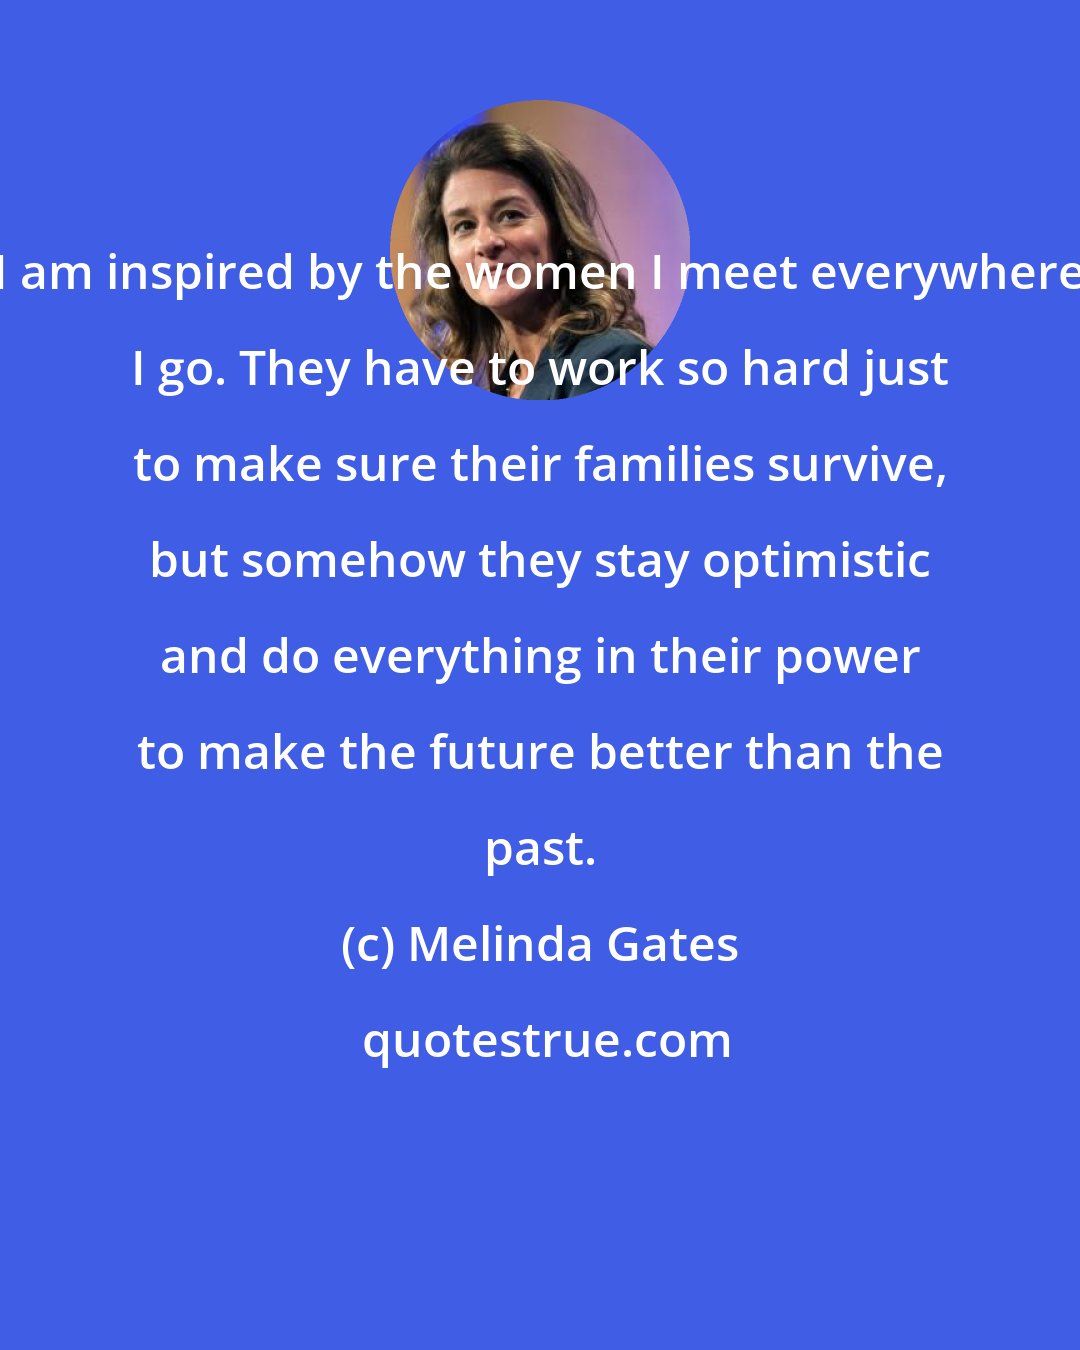 Melinda Gates: I am inspired by the women I meet everywhere I go. They have to work so hard just to make sure their families survive, but somehow they stay optimistic and do everything in their power to make the future better than the past.